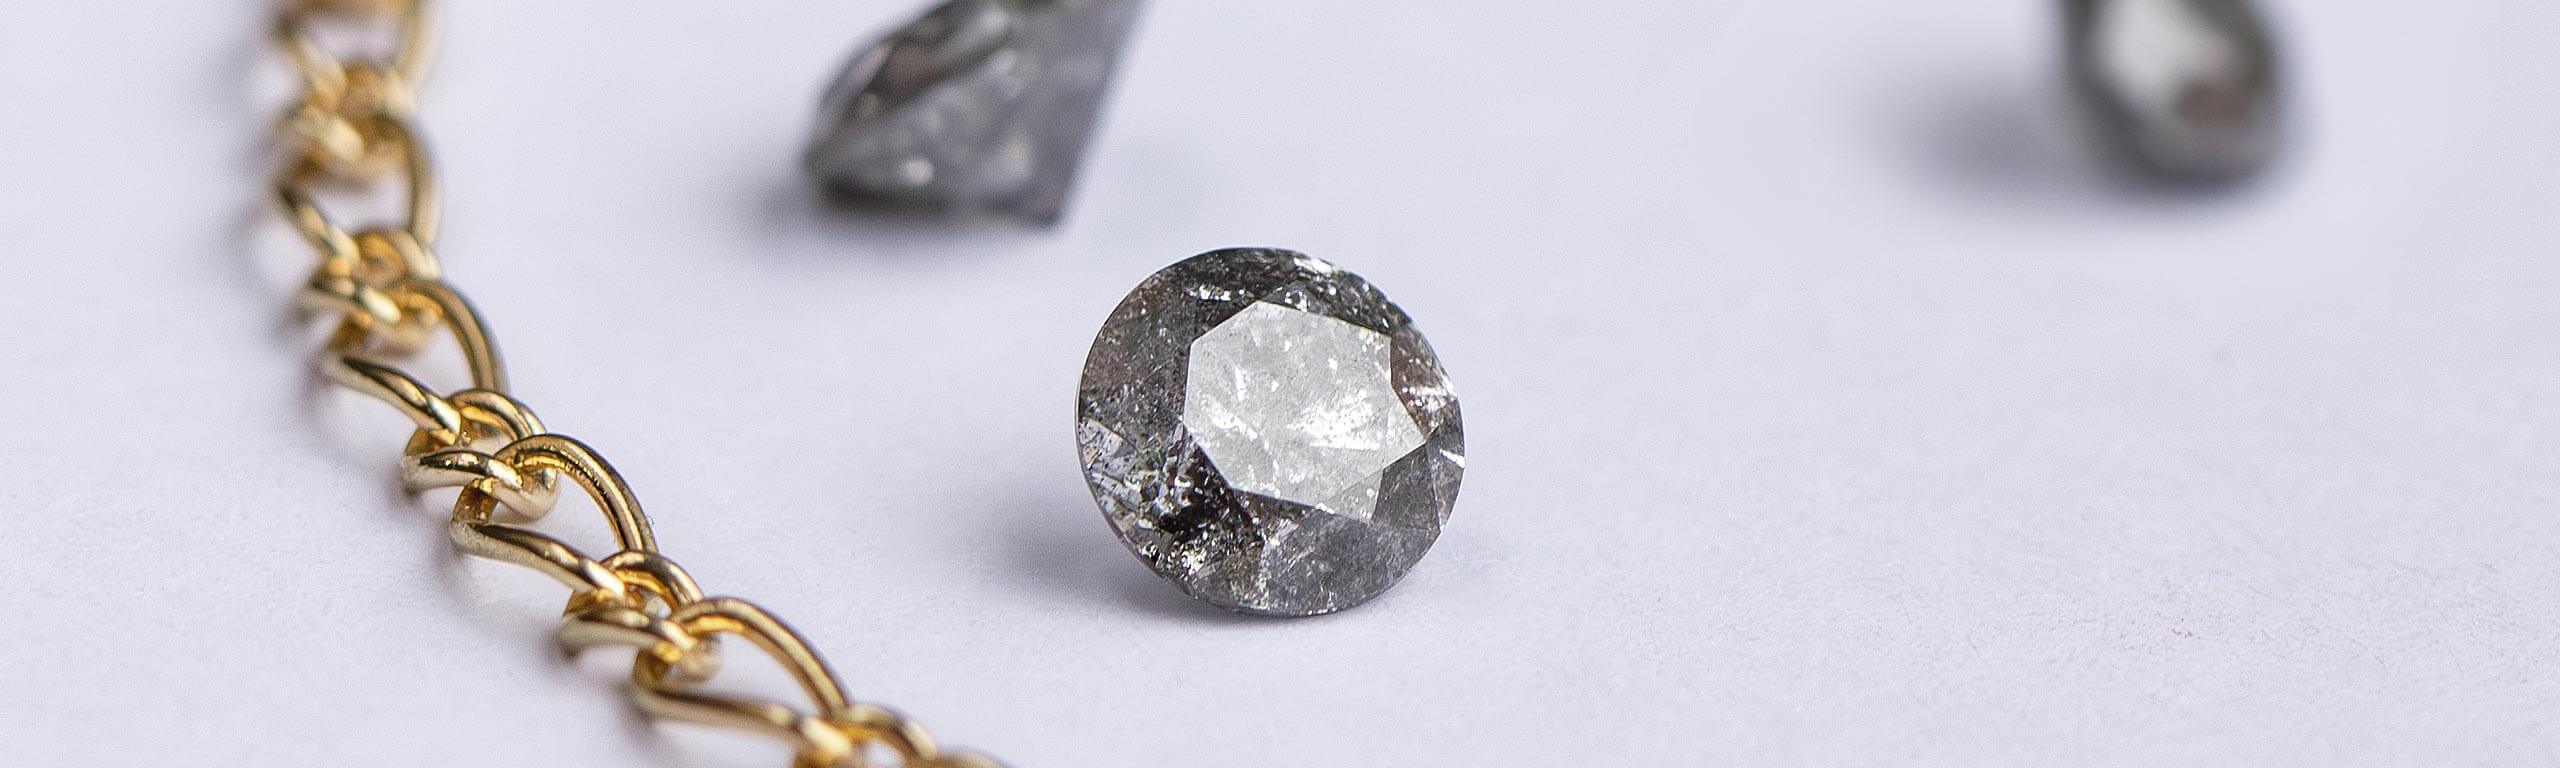 round salt and pepper diamond is a diamond with inclusions